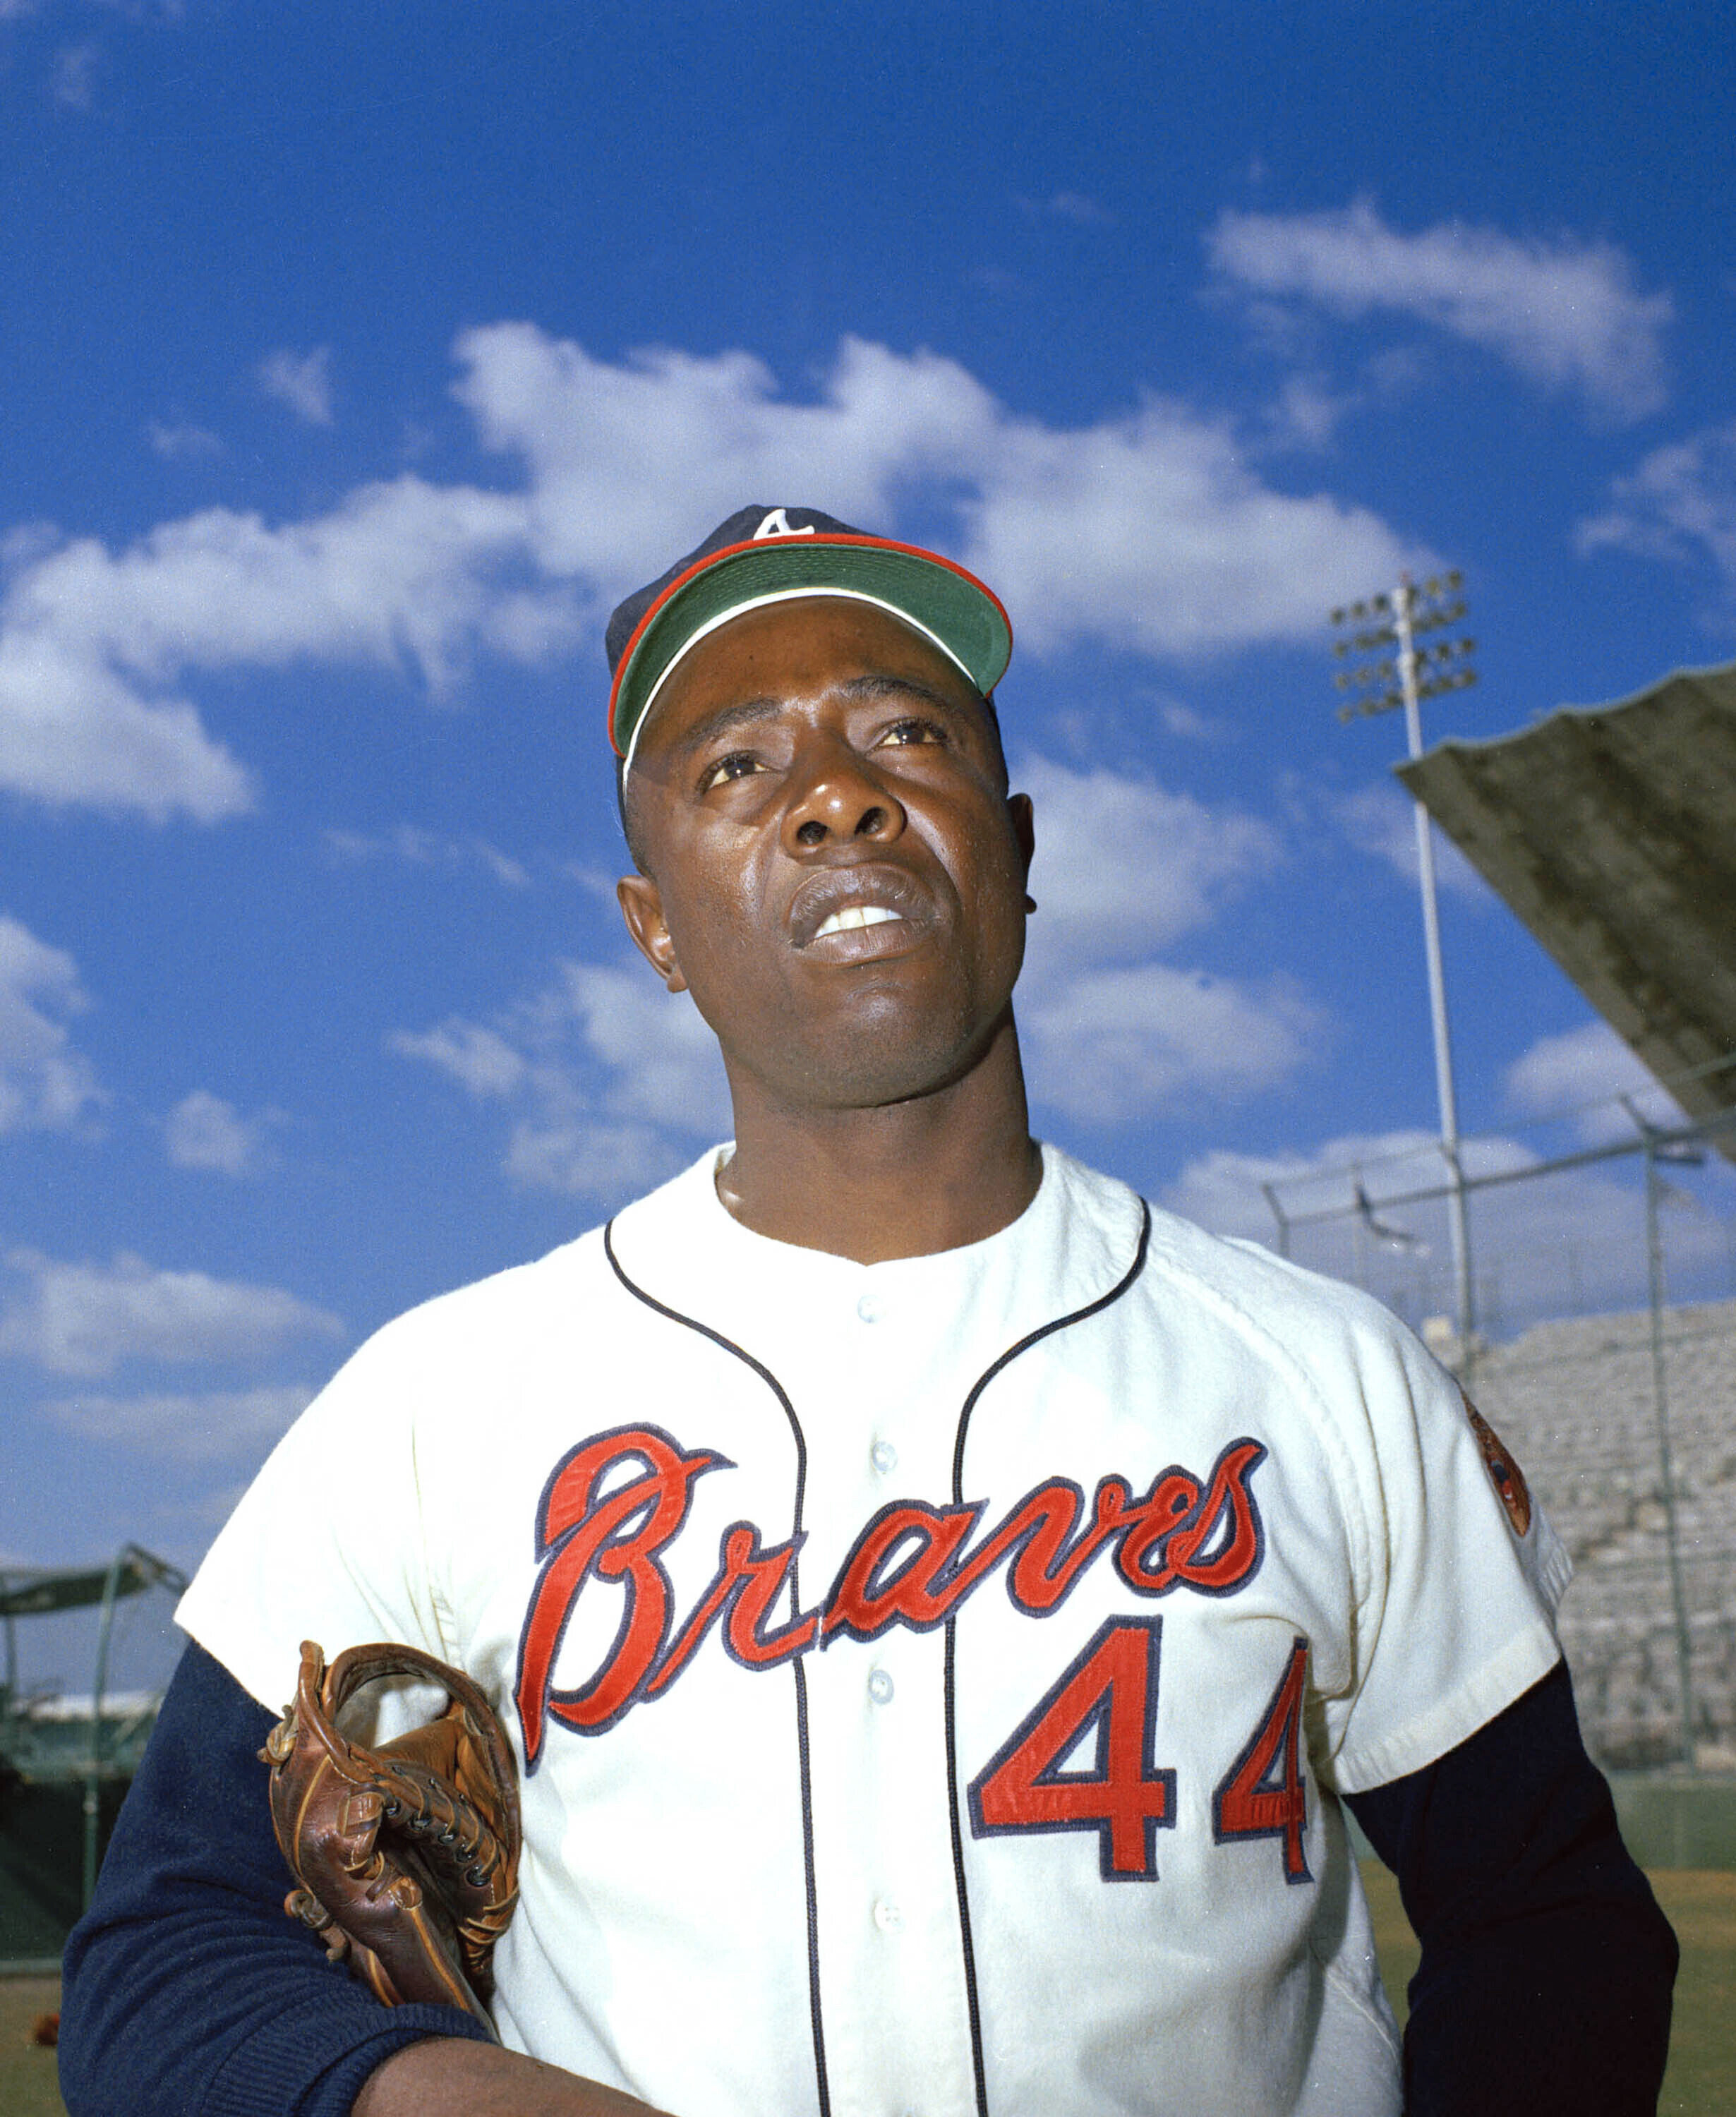 Hank Aaron in his Braves 44 jersey with a glove under one arm 